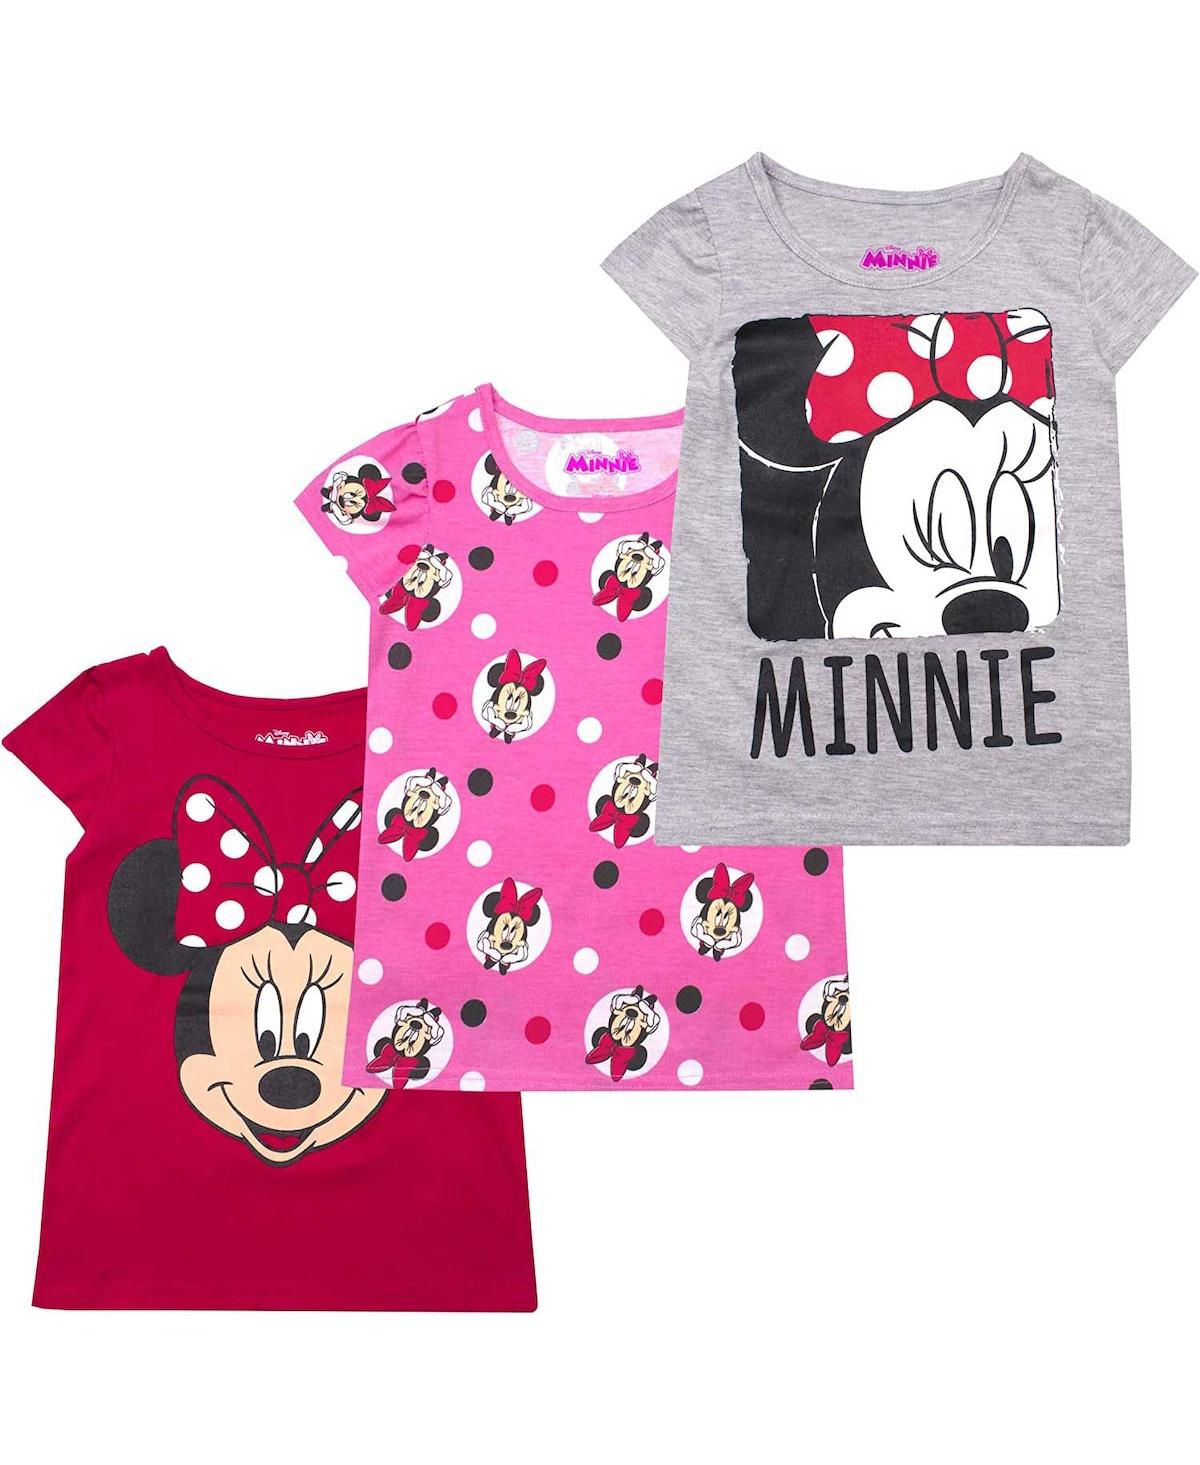 Shop Children's Apparel Network Toddler Girls Minnie Mouse Gray, Pink, Red Graphic 3-pack T-shirt Set